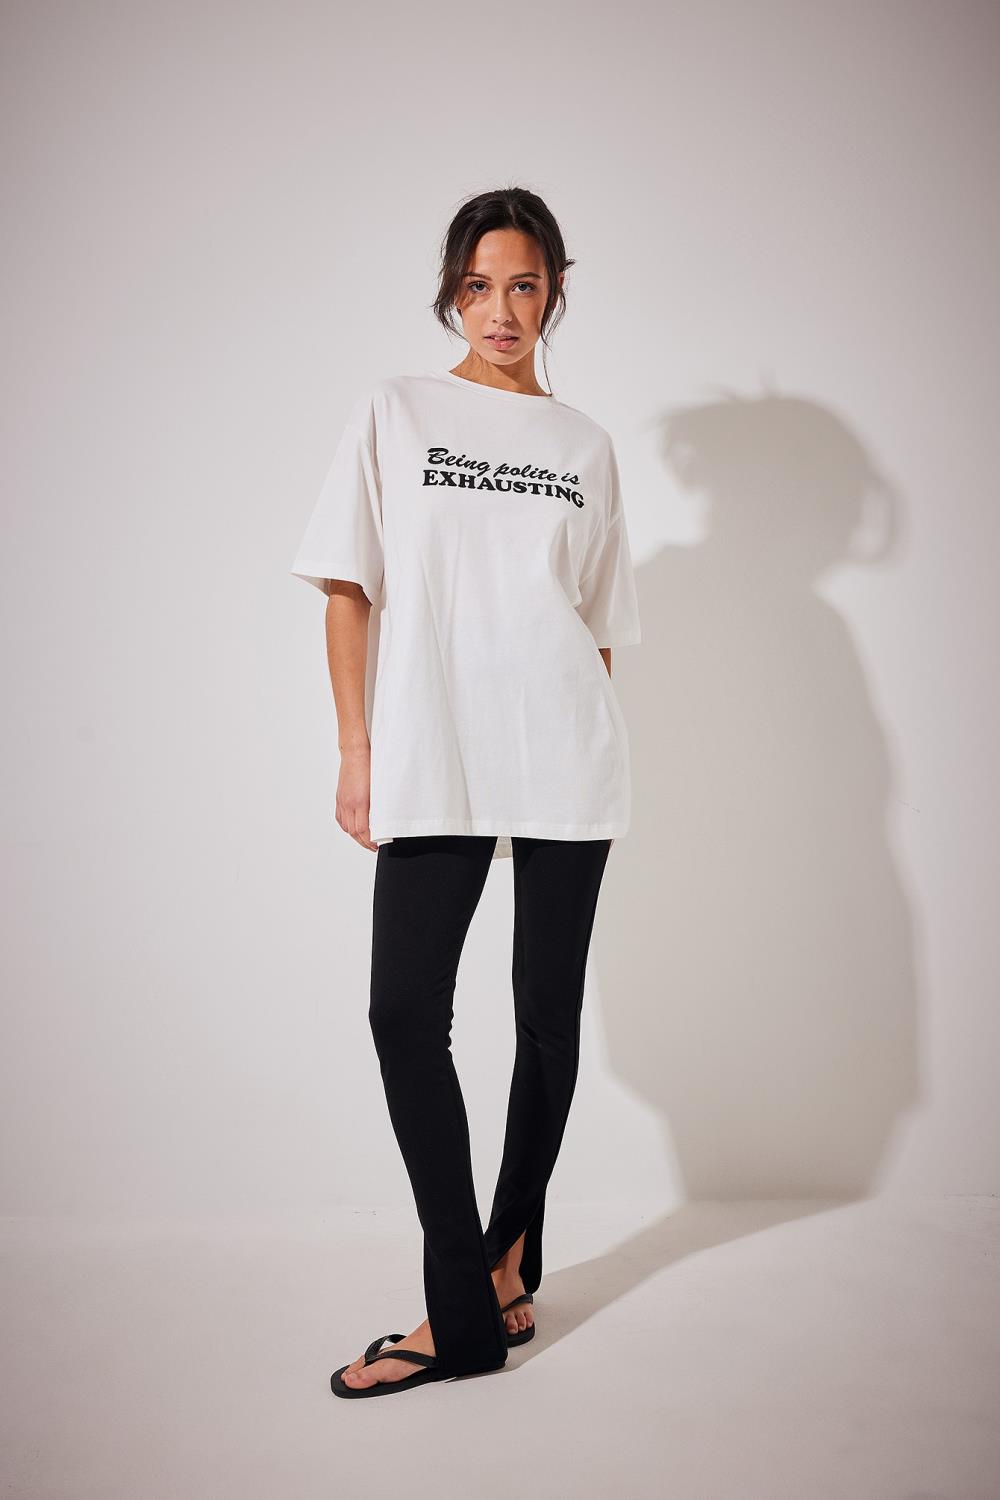 THE OVERSIZED CITY PRINT TSHIRT - BEING POLITE IS HUH - EXCLUSIVE Tops from NA-KD - Just $36.00! SHOP NOW AT IAMINHATELOVE BOTH IN STORE FOR CYPRUS AND ONLINE WORLDWIDE